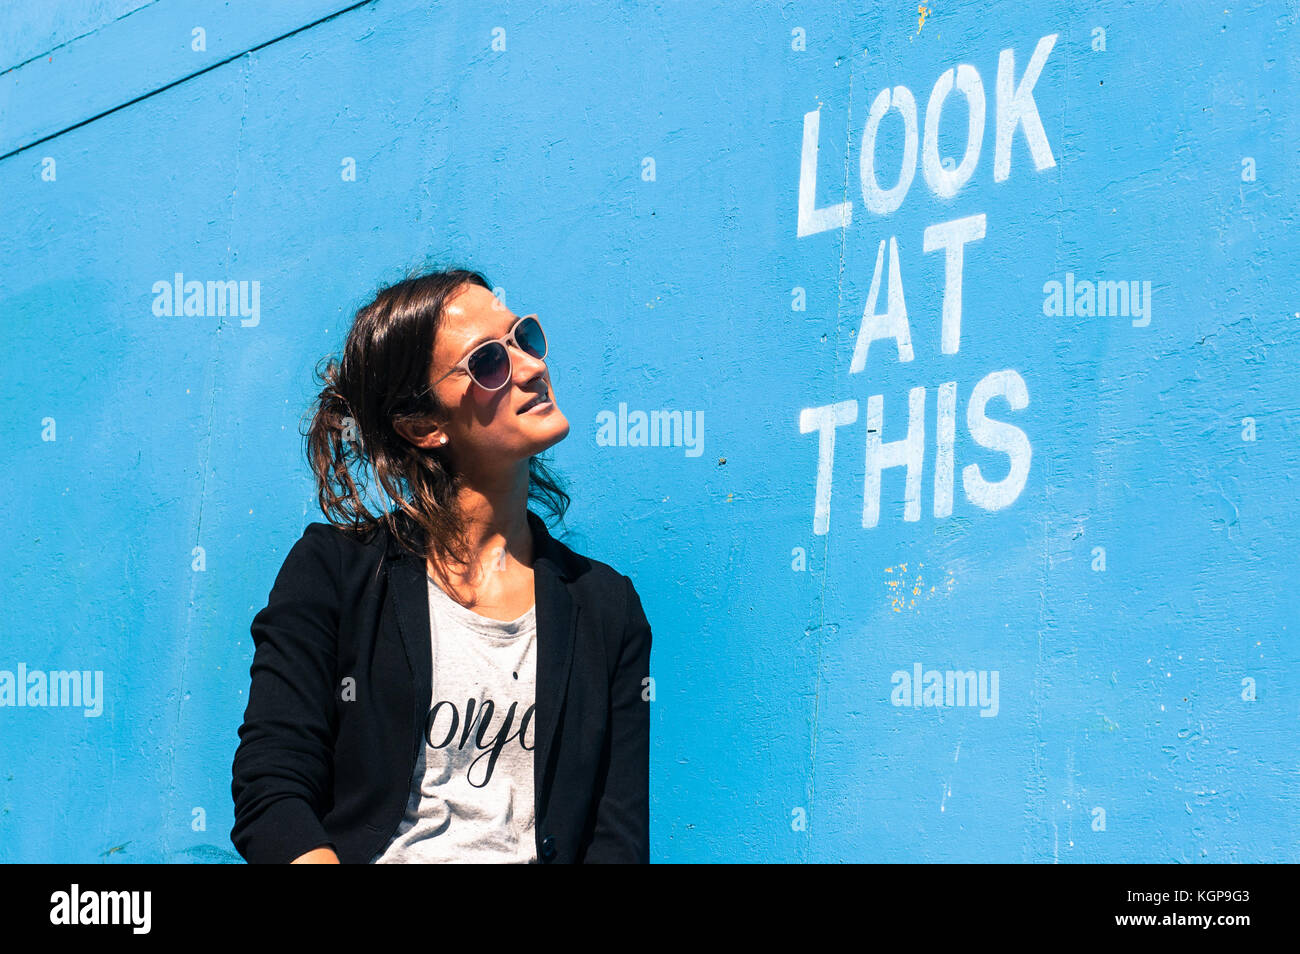 Hipster model wearing sunglasses posing next to a blue wall with the words 'Look at this' written on it Stock Photo